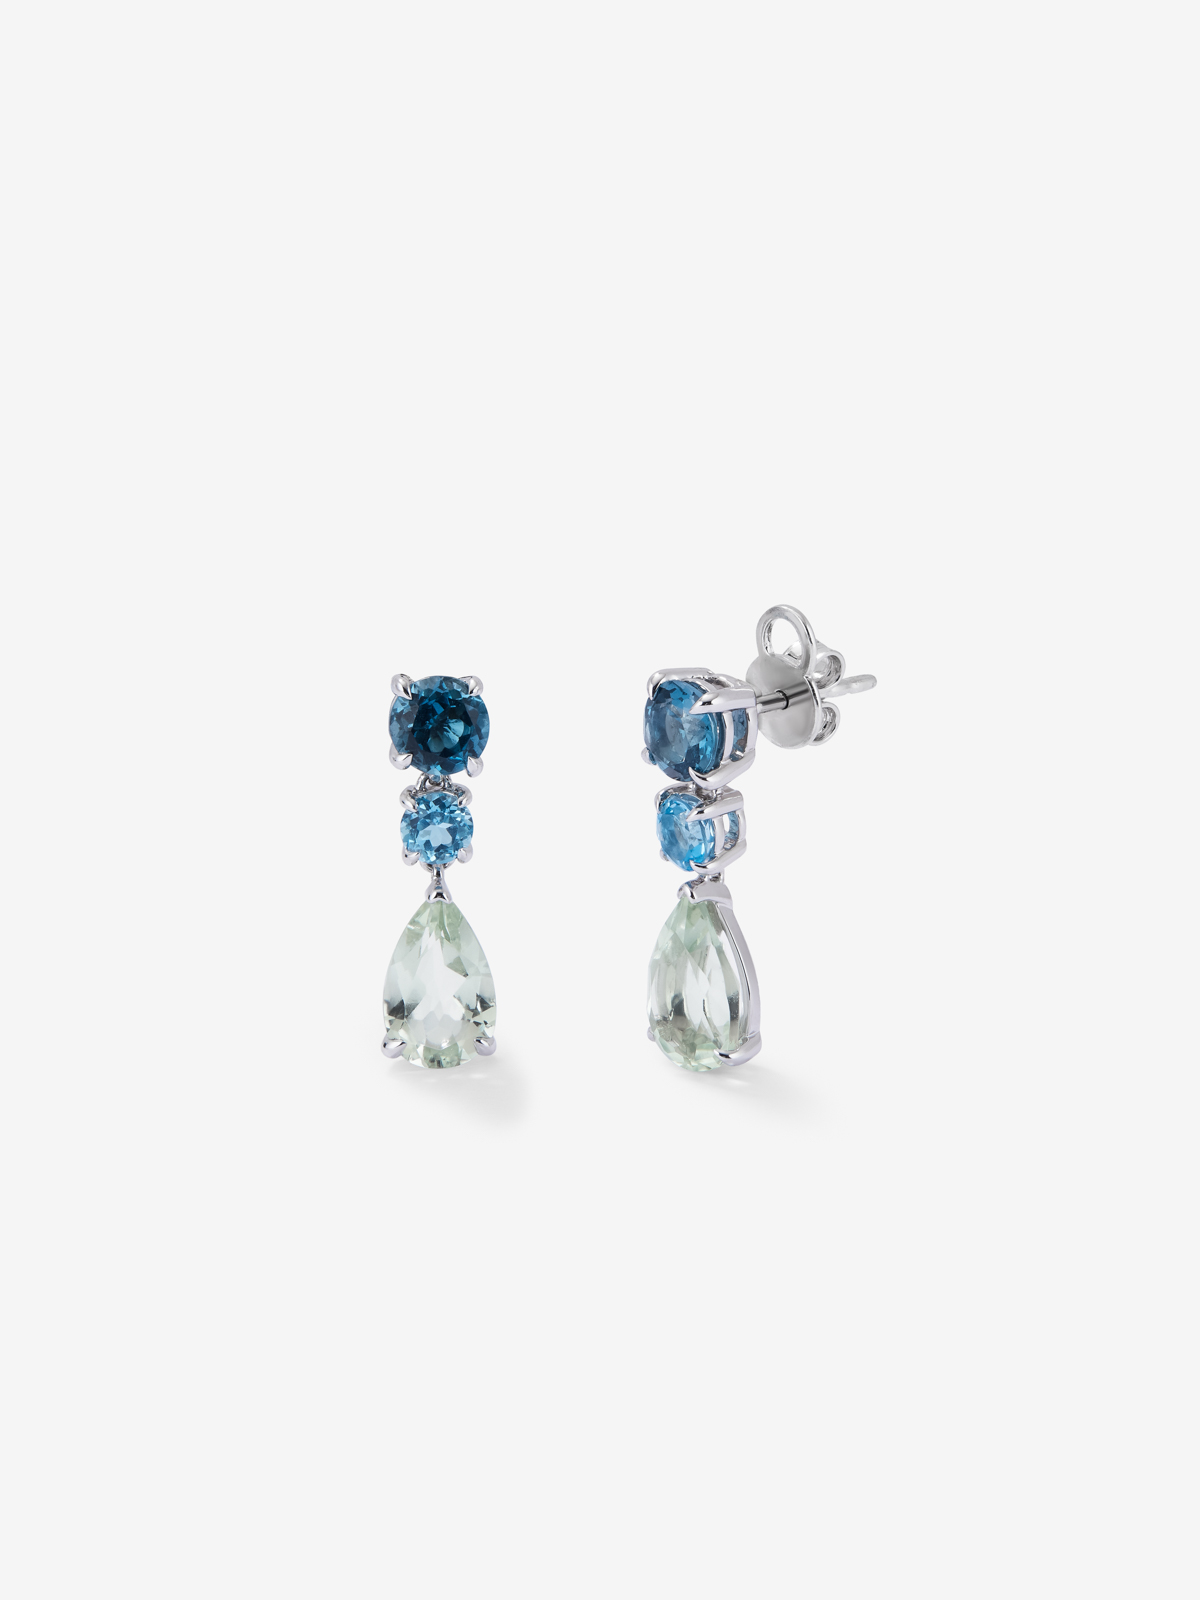 Long 925 silver earrings with topaz and green amethyst